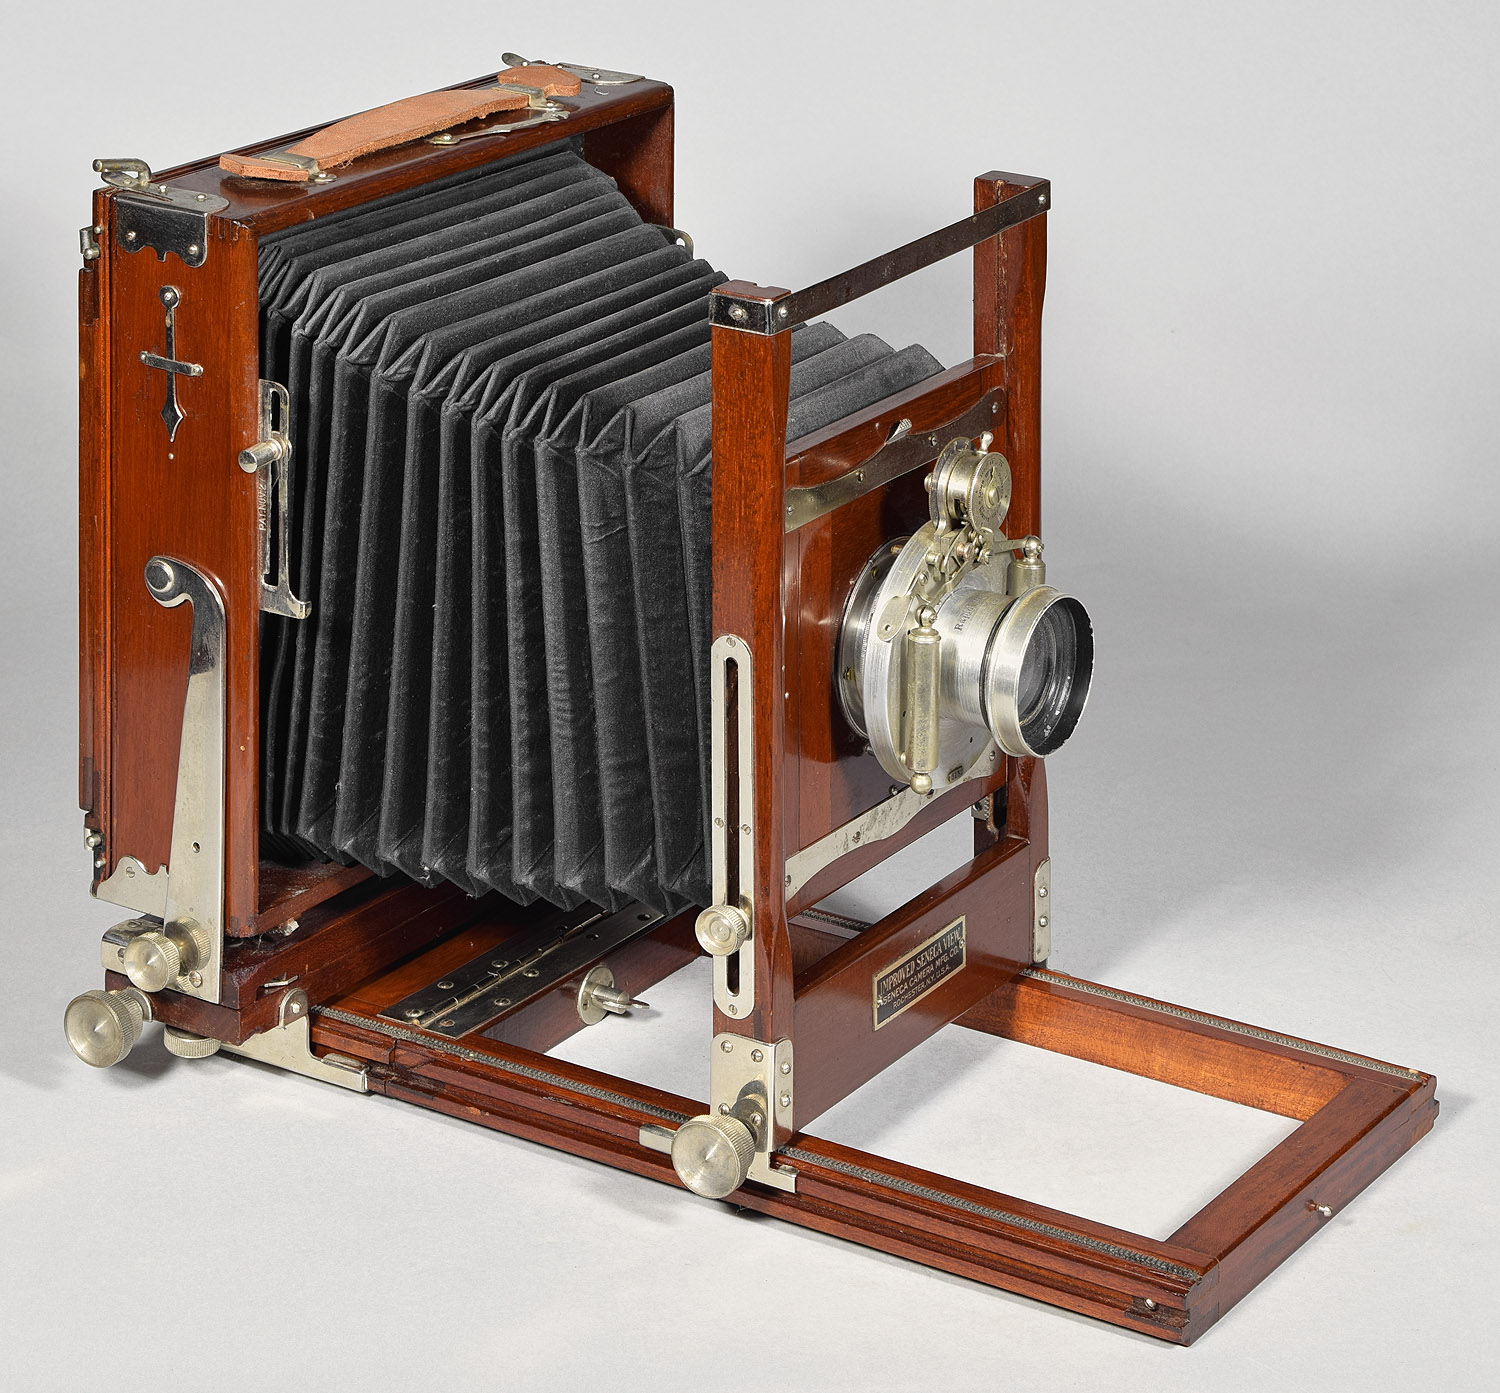 1249.Seneca-Seneca.View.Imp.Var.3.stained-6x8-a-camera.only.without.extension-1500.jpg